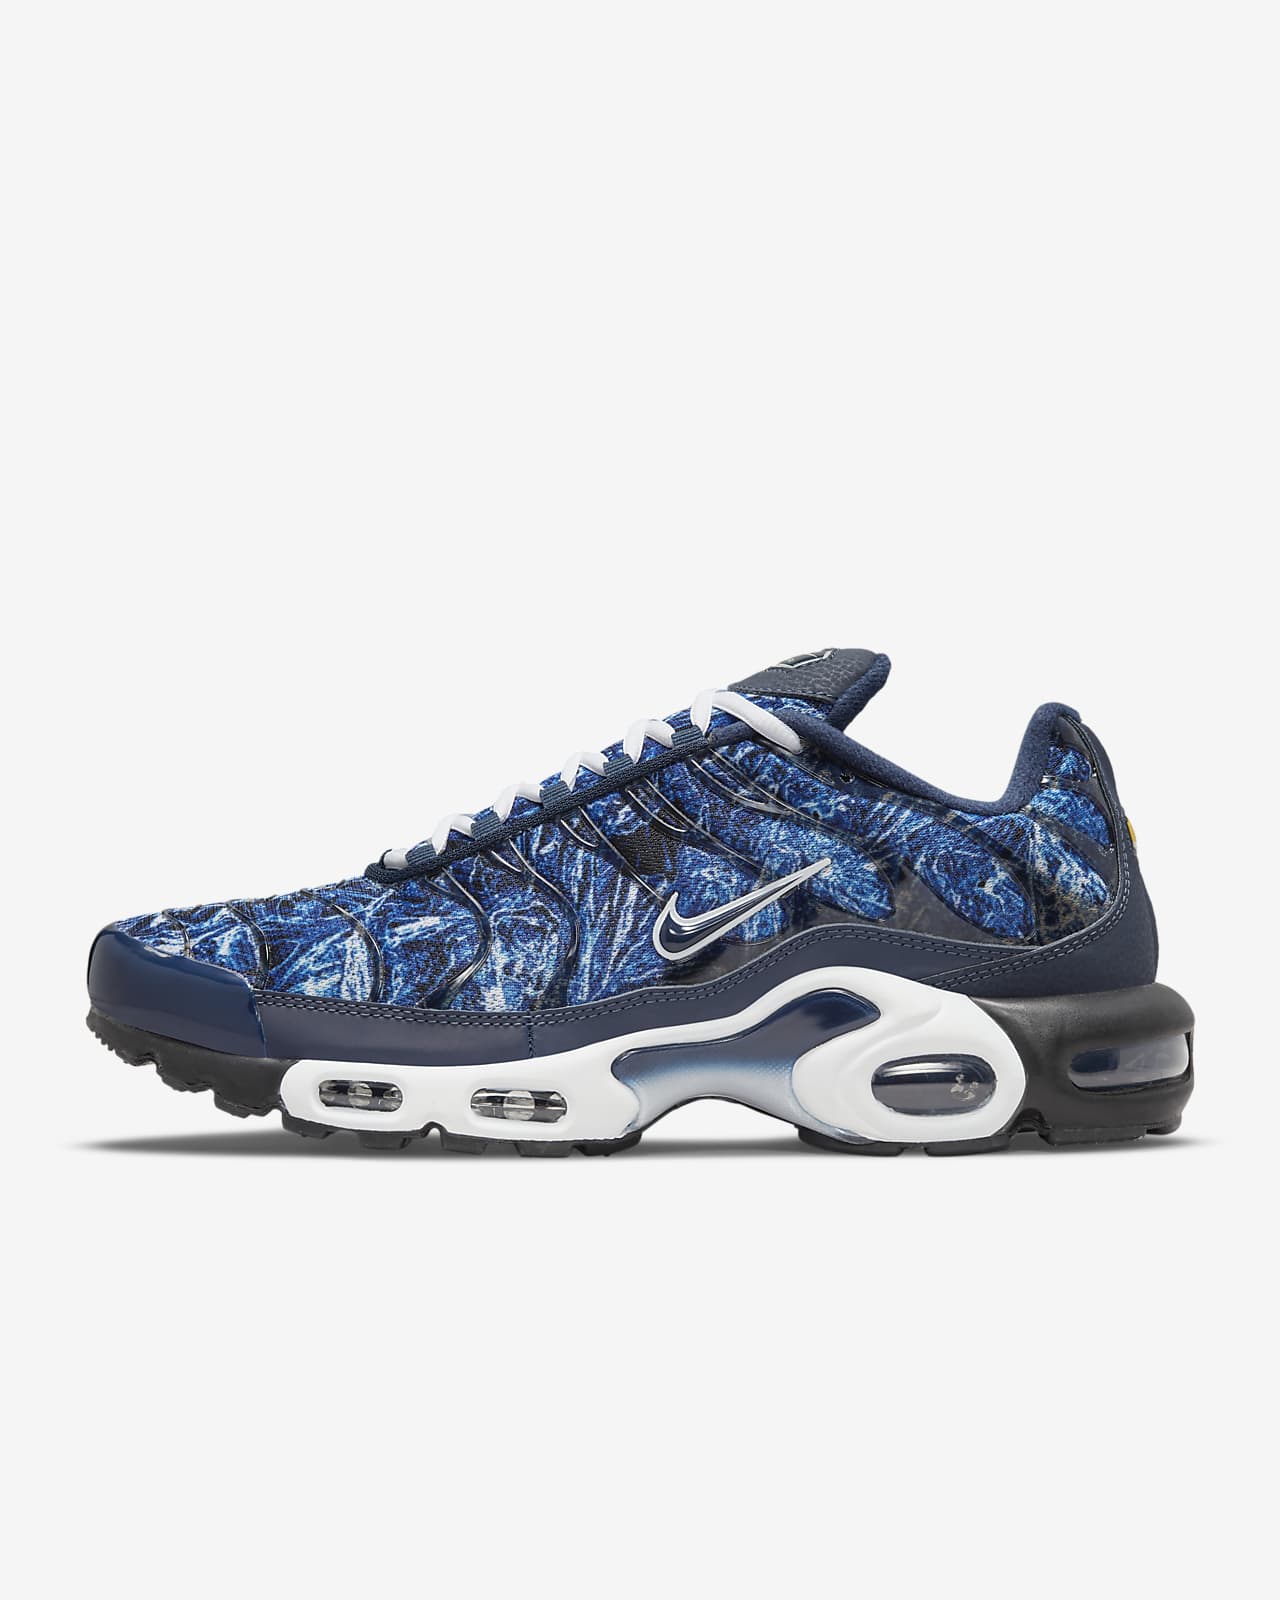 Nike Air Max Plus Men's Shoes in Blue, Size: 11 | DO6384-400